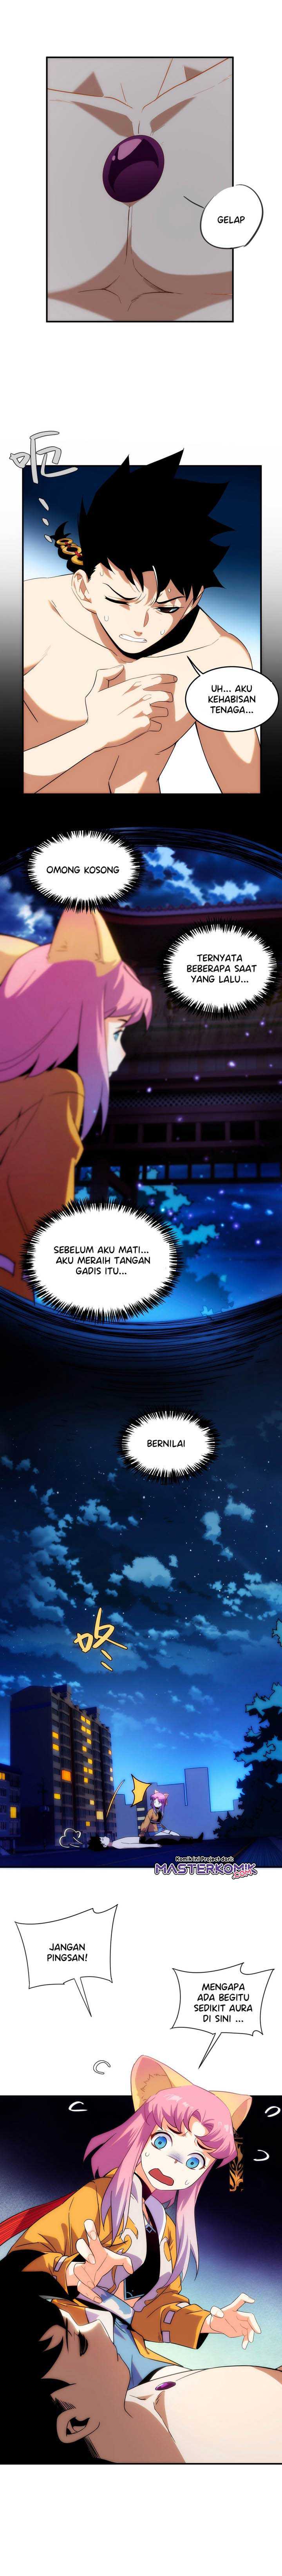 The legend are true Chapter 03